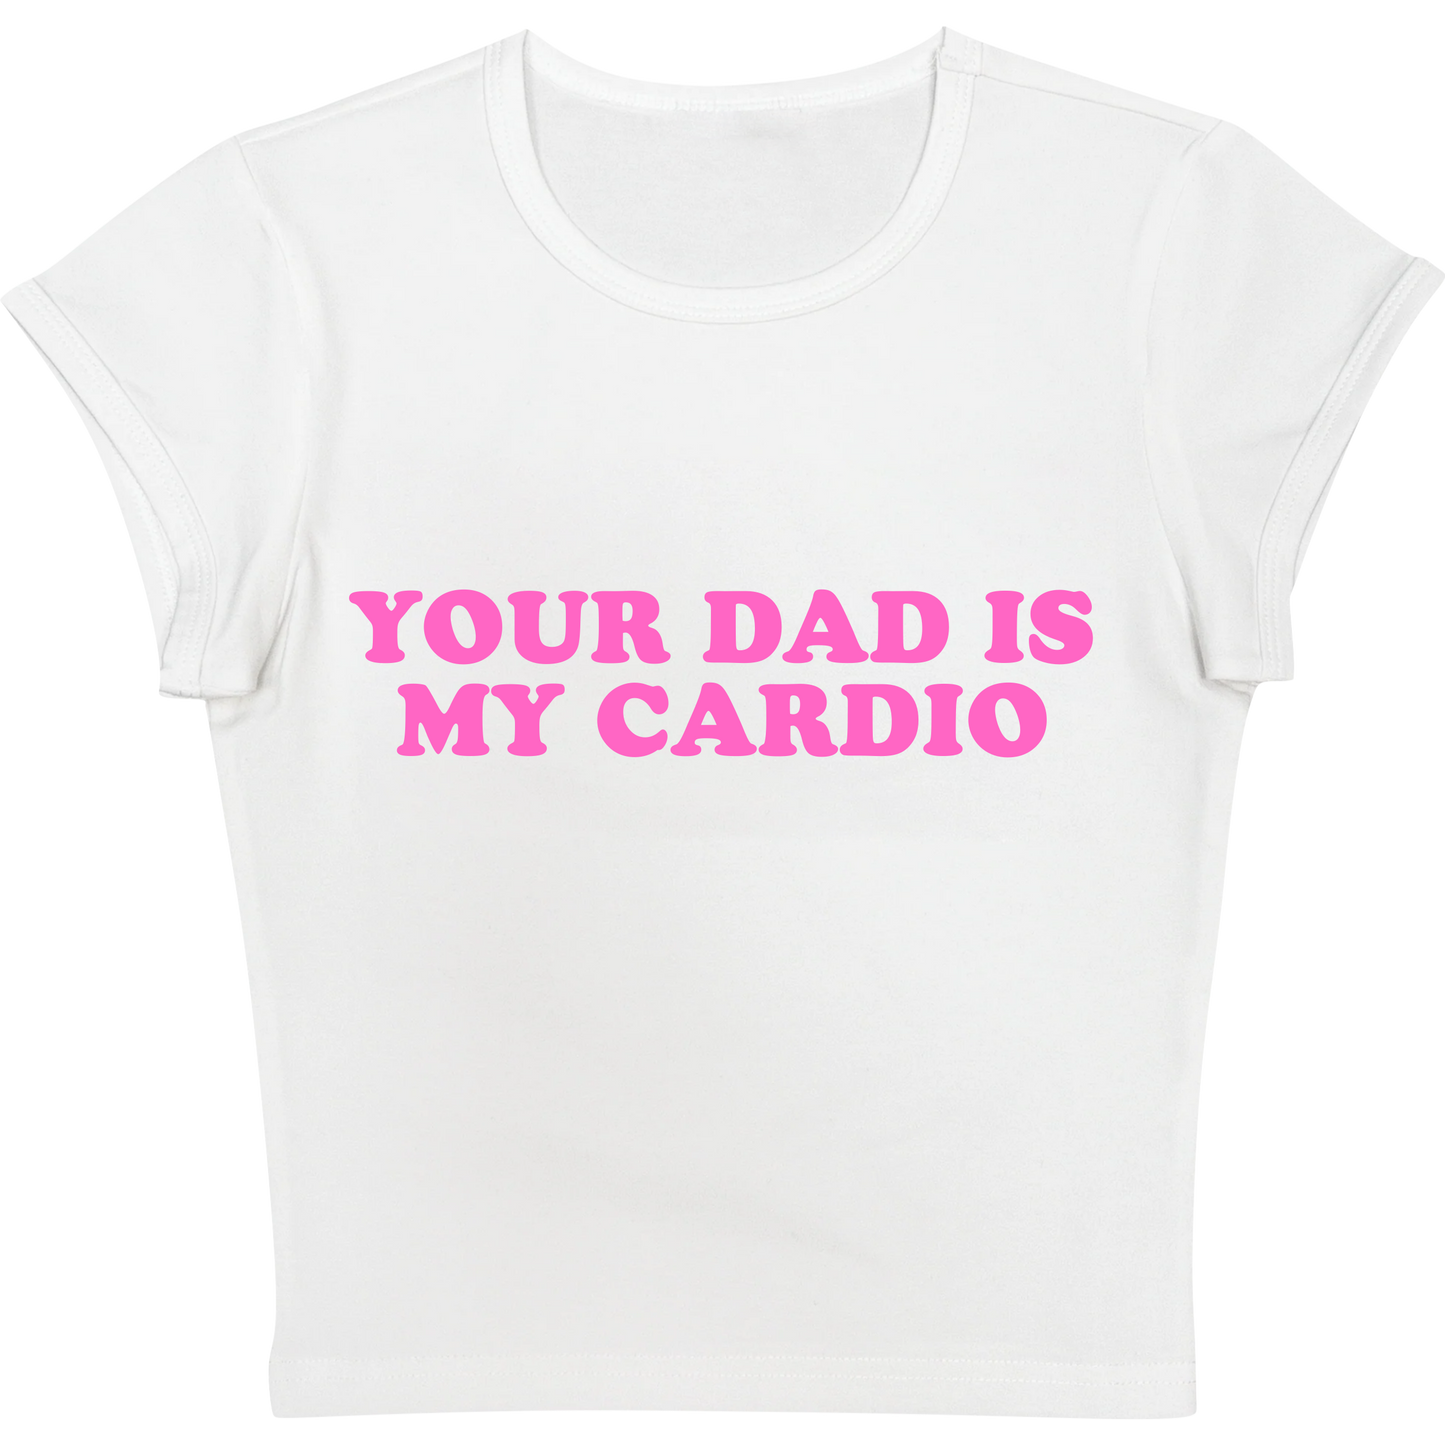 Your Dad is my Cardio White Baby tee